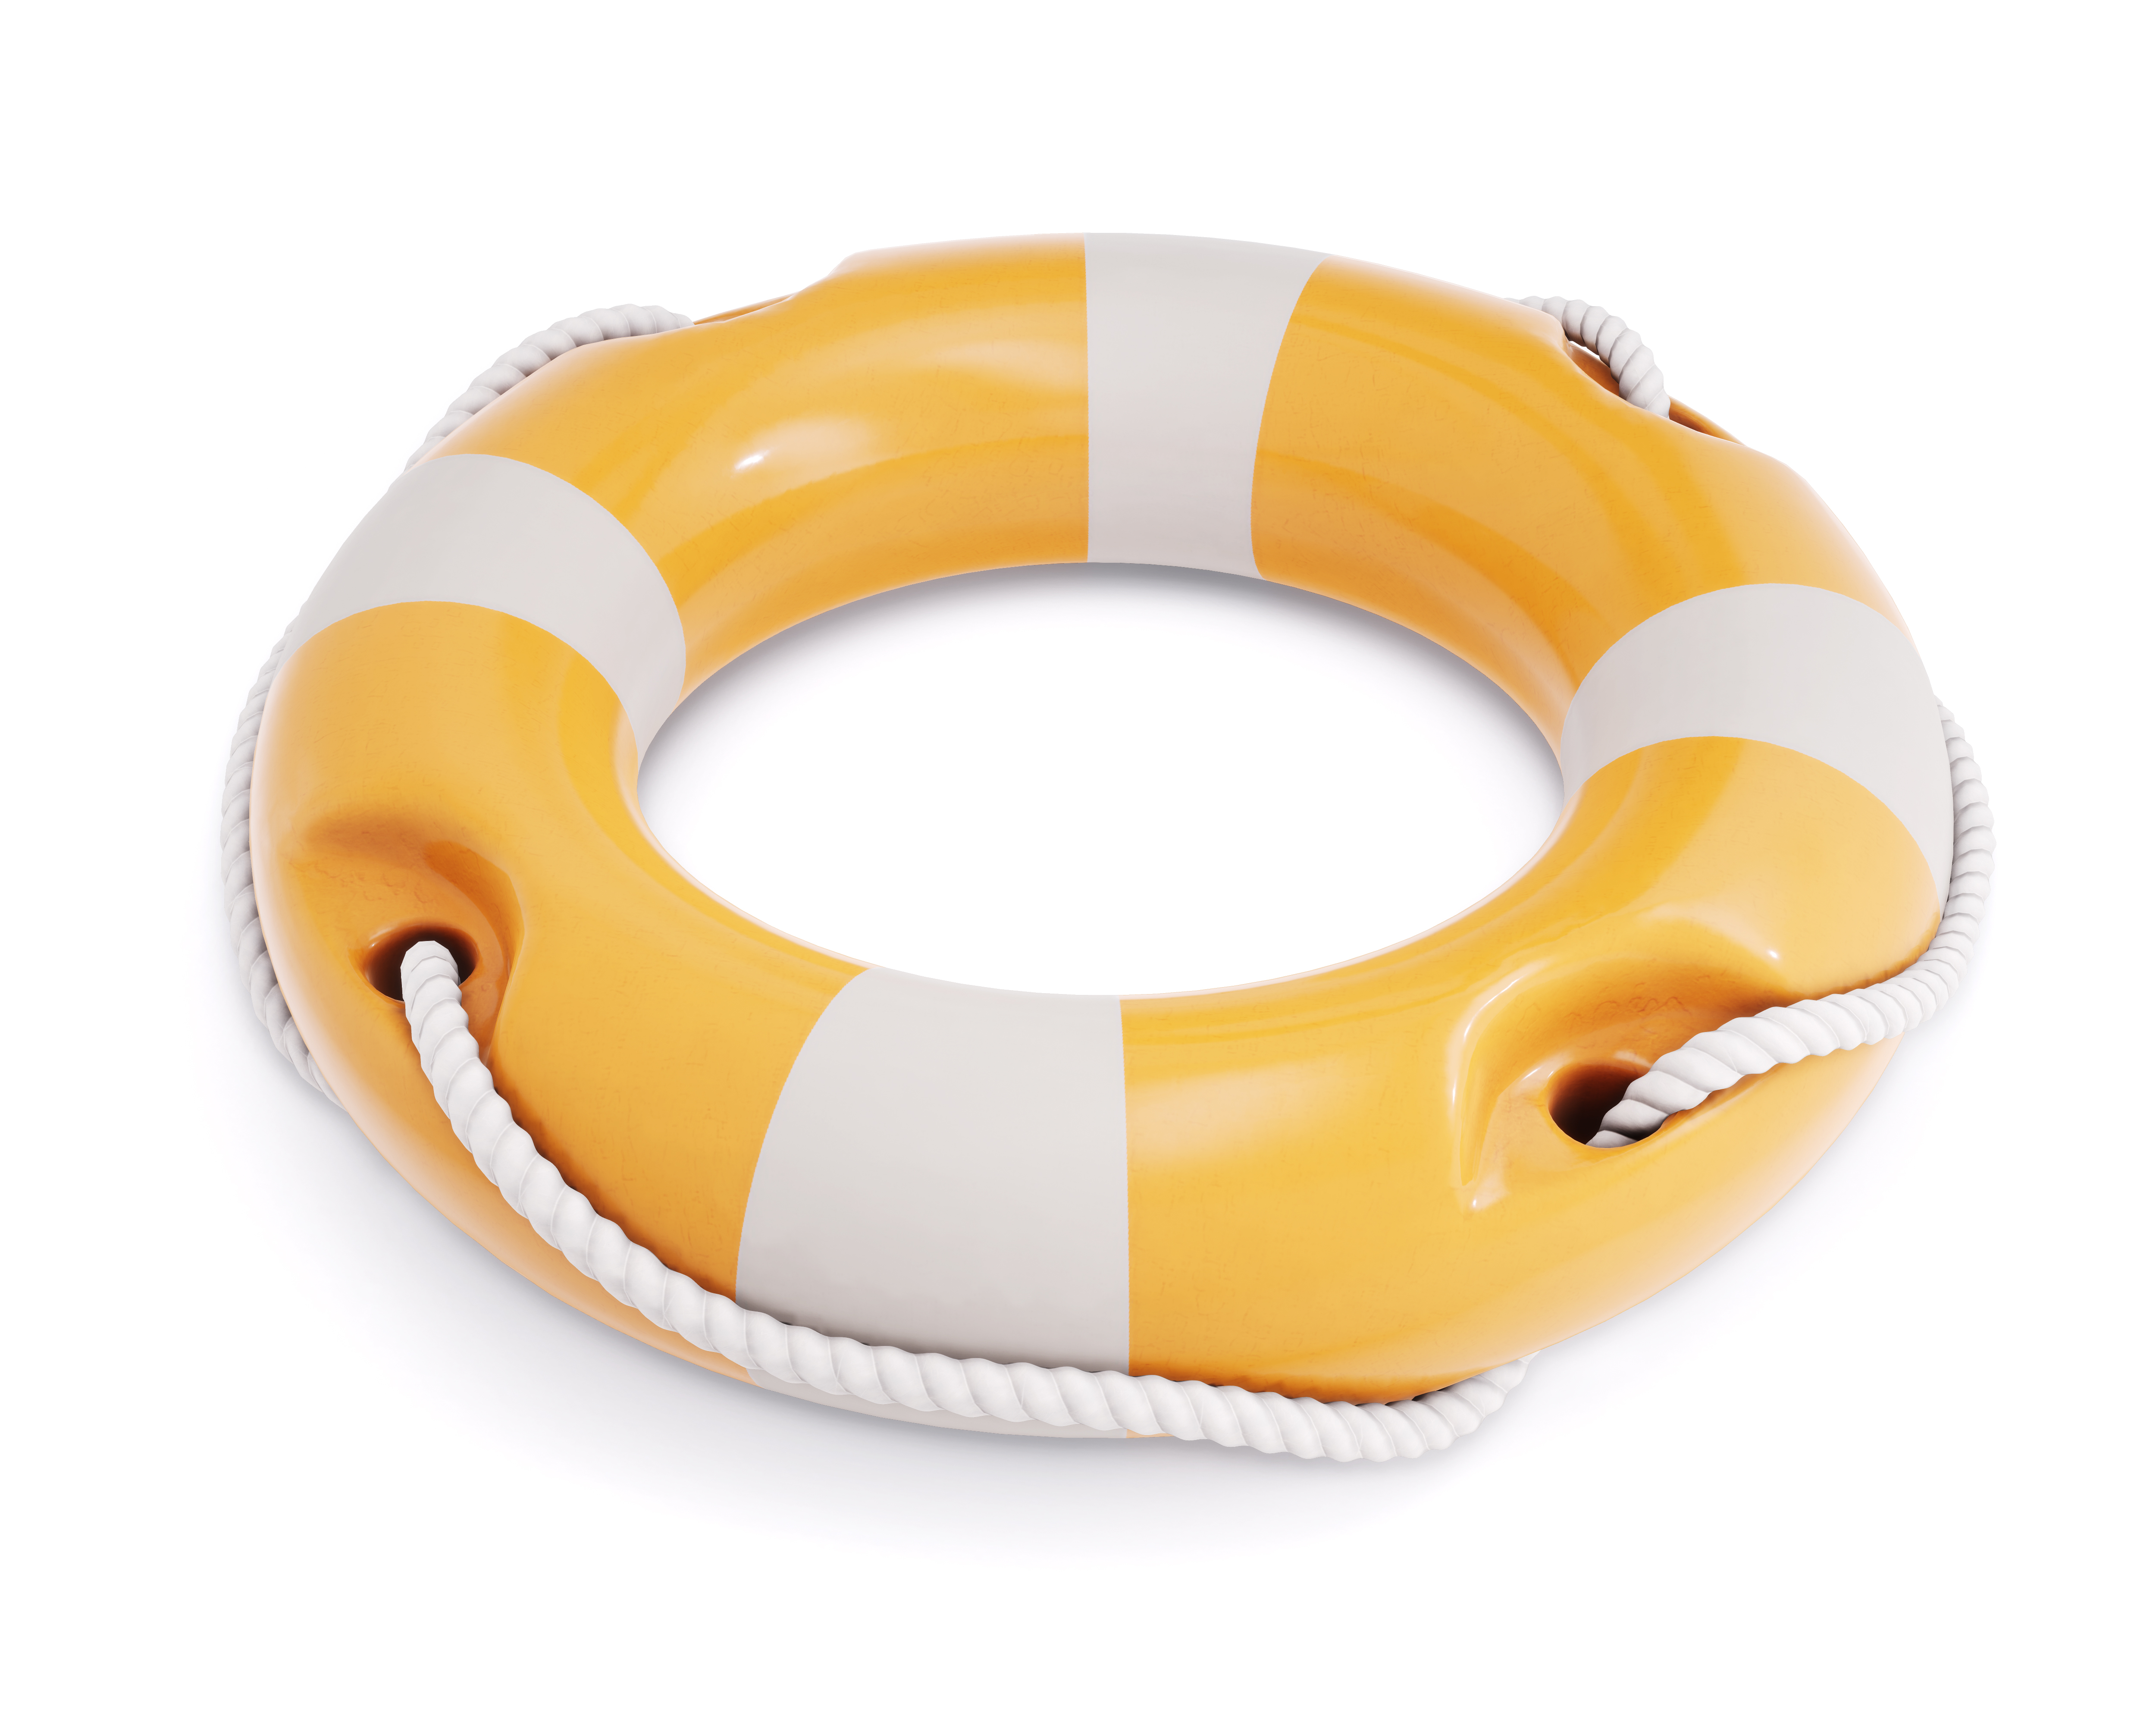 life-buoy-for-safety-at-sea-isolated-on-white-P3W672V